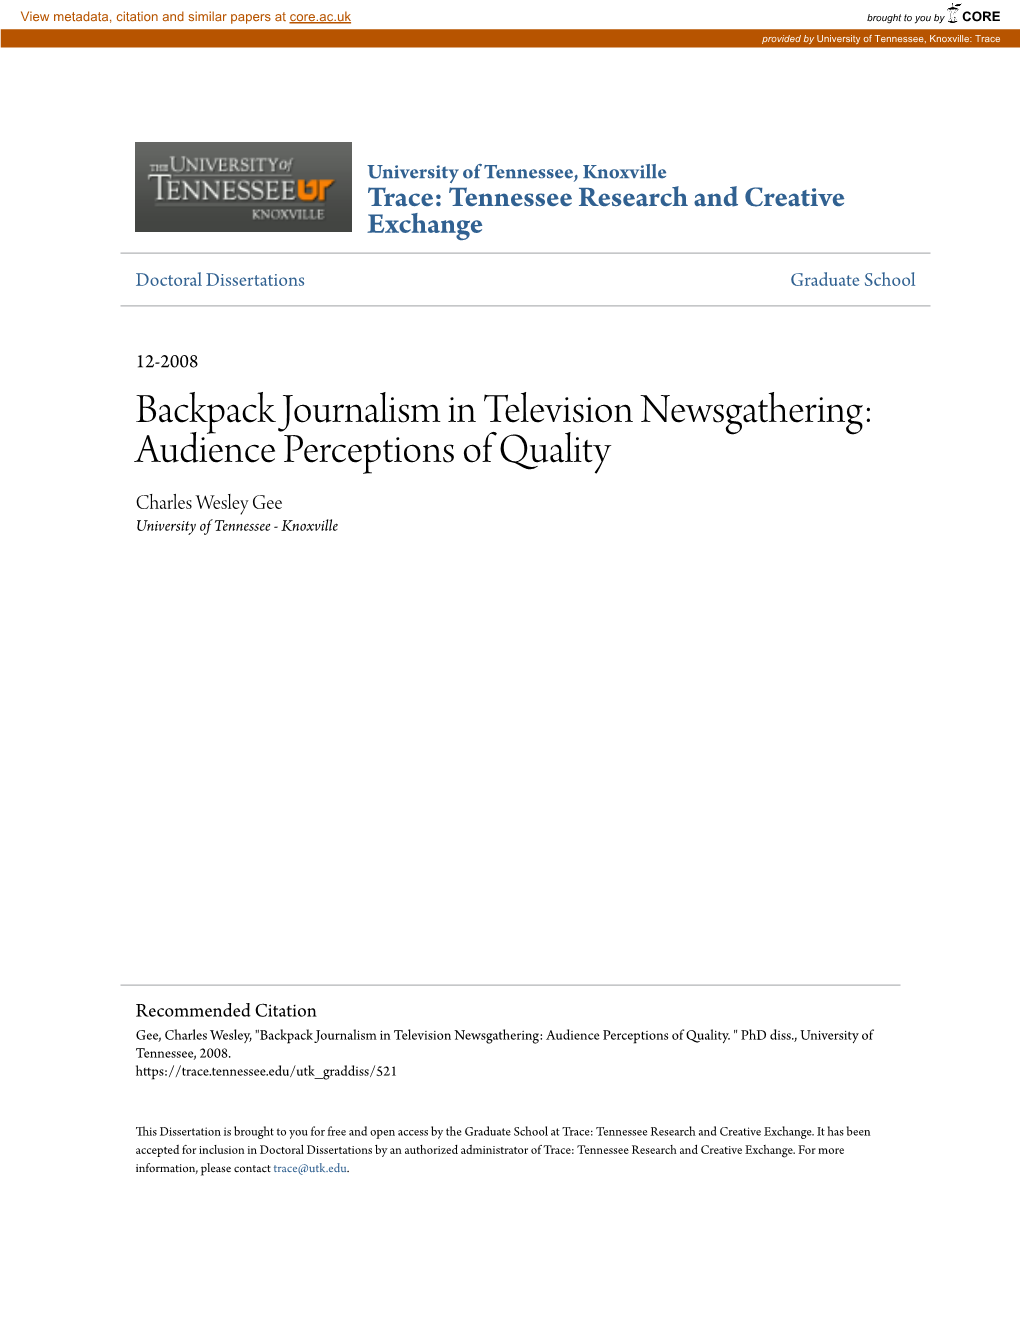 Backpack Journalism in Television Newsgathering: Audience Perceptions of Quality Charles Wesley Gee University of Tennessee - Knoxville